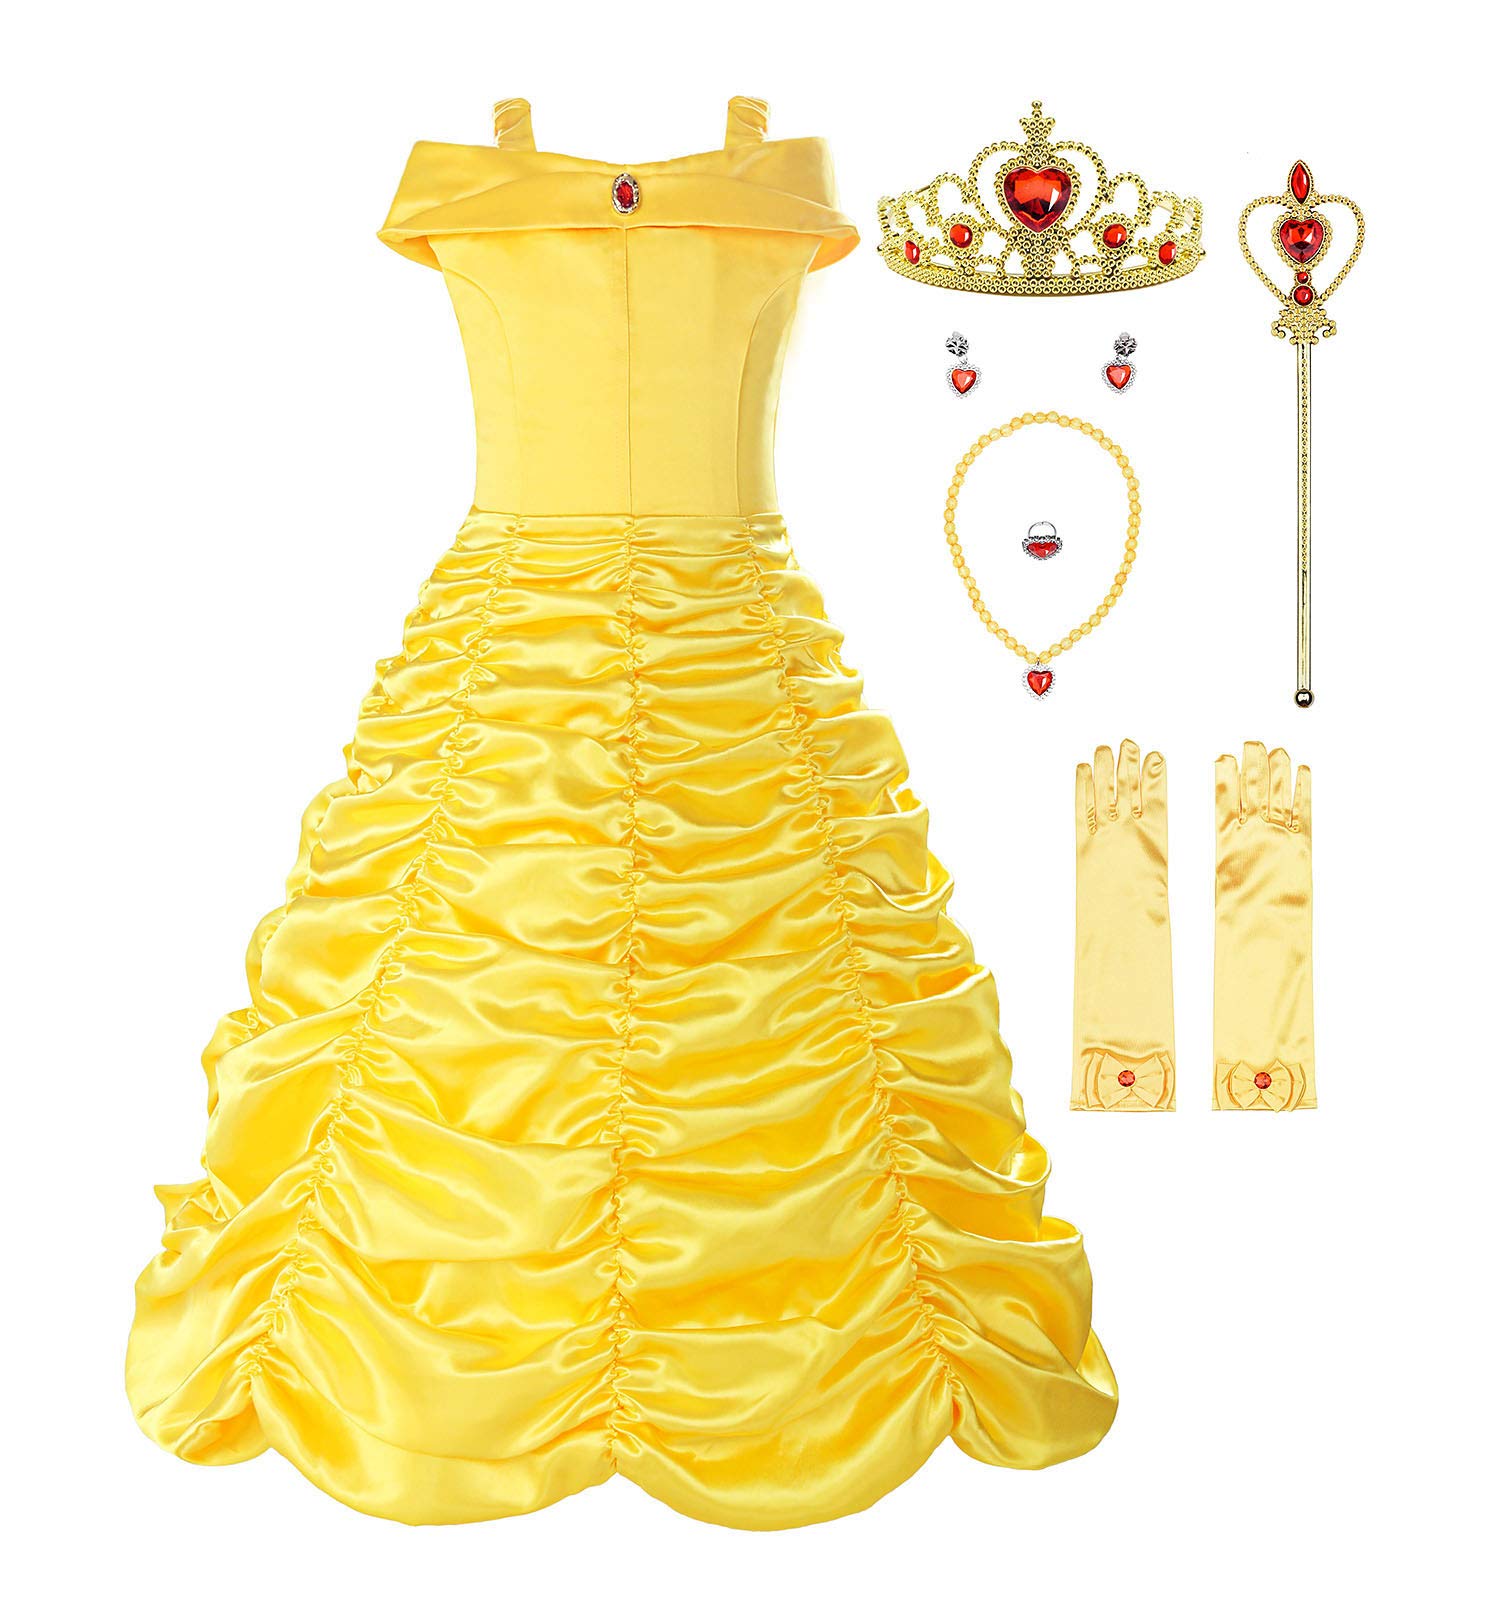 ReliBeauty Little Girls Layered Princess Dress Costume with Accessories, Yellow, 4T-4